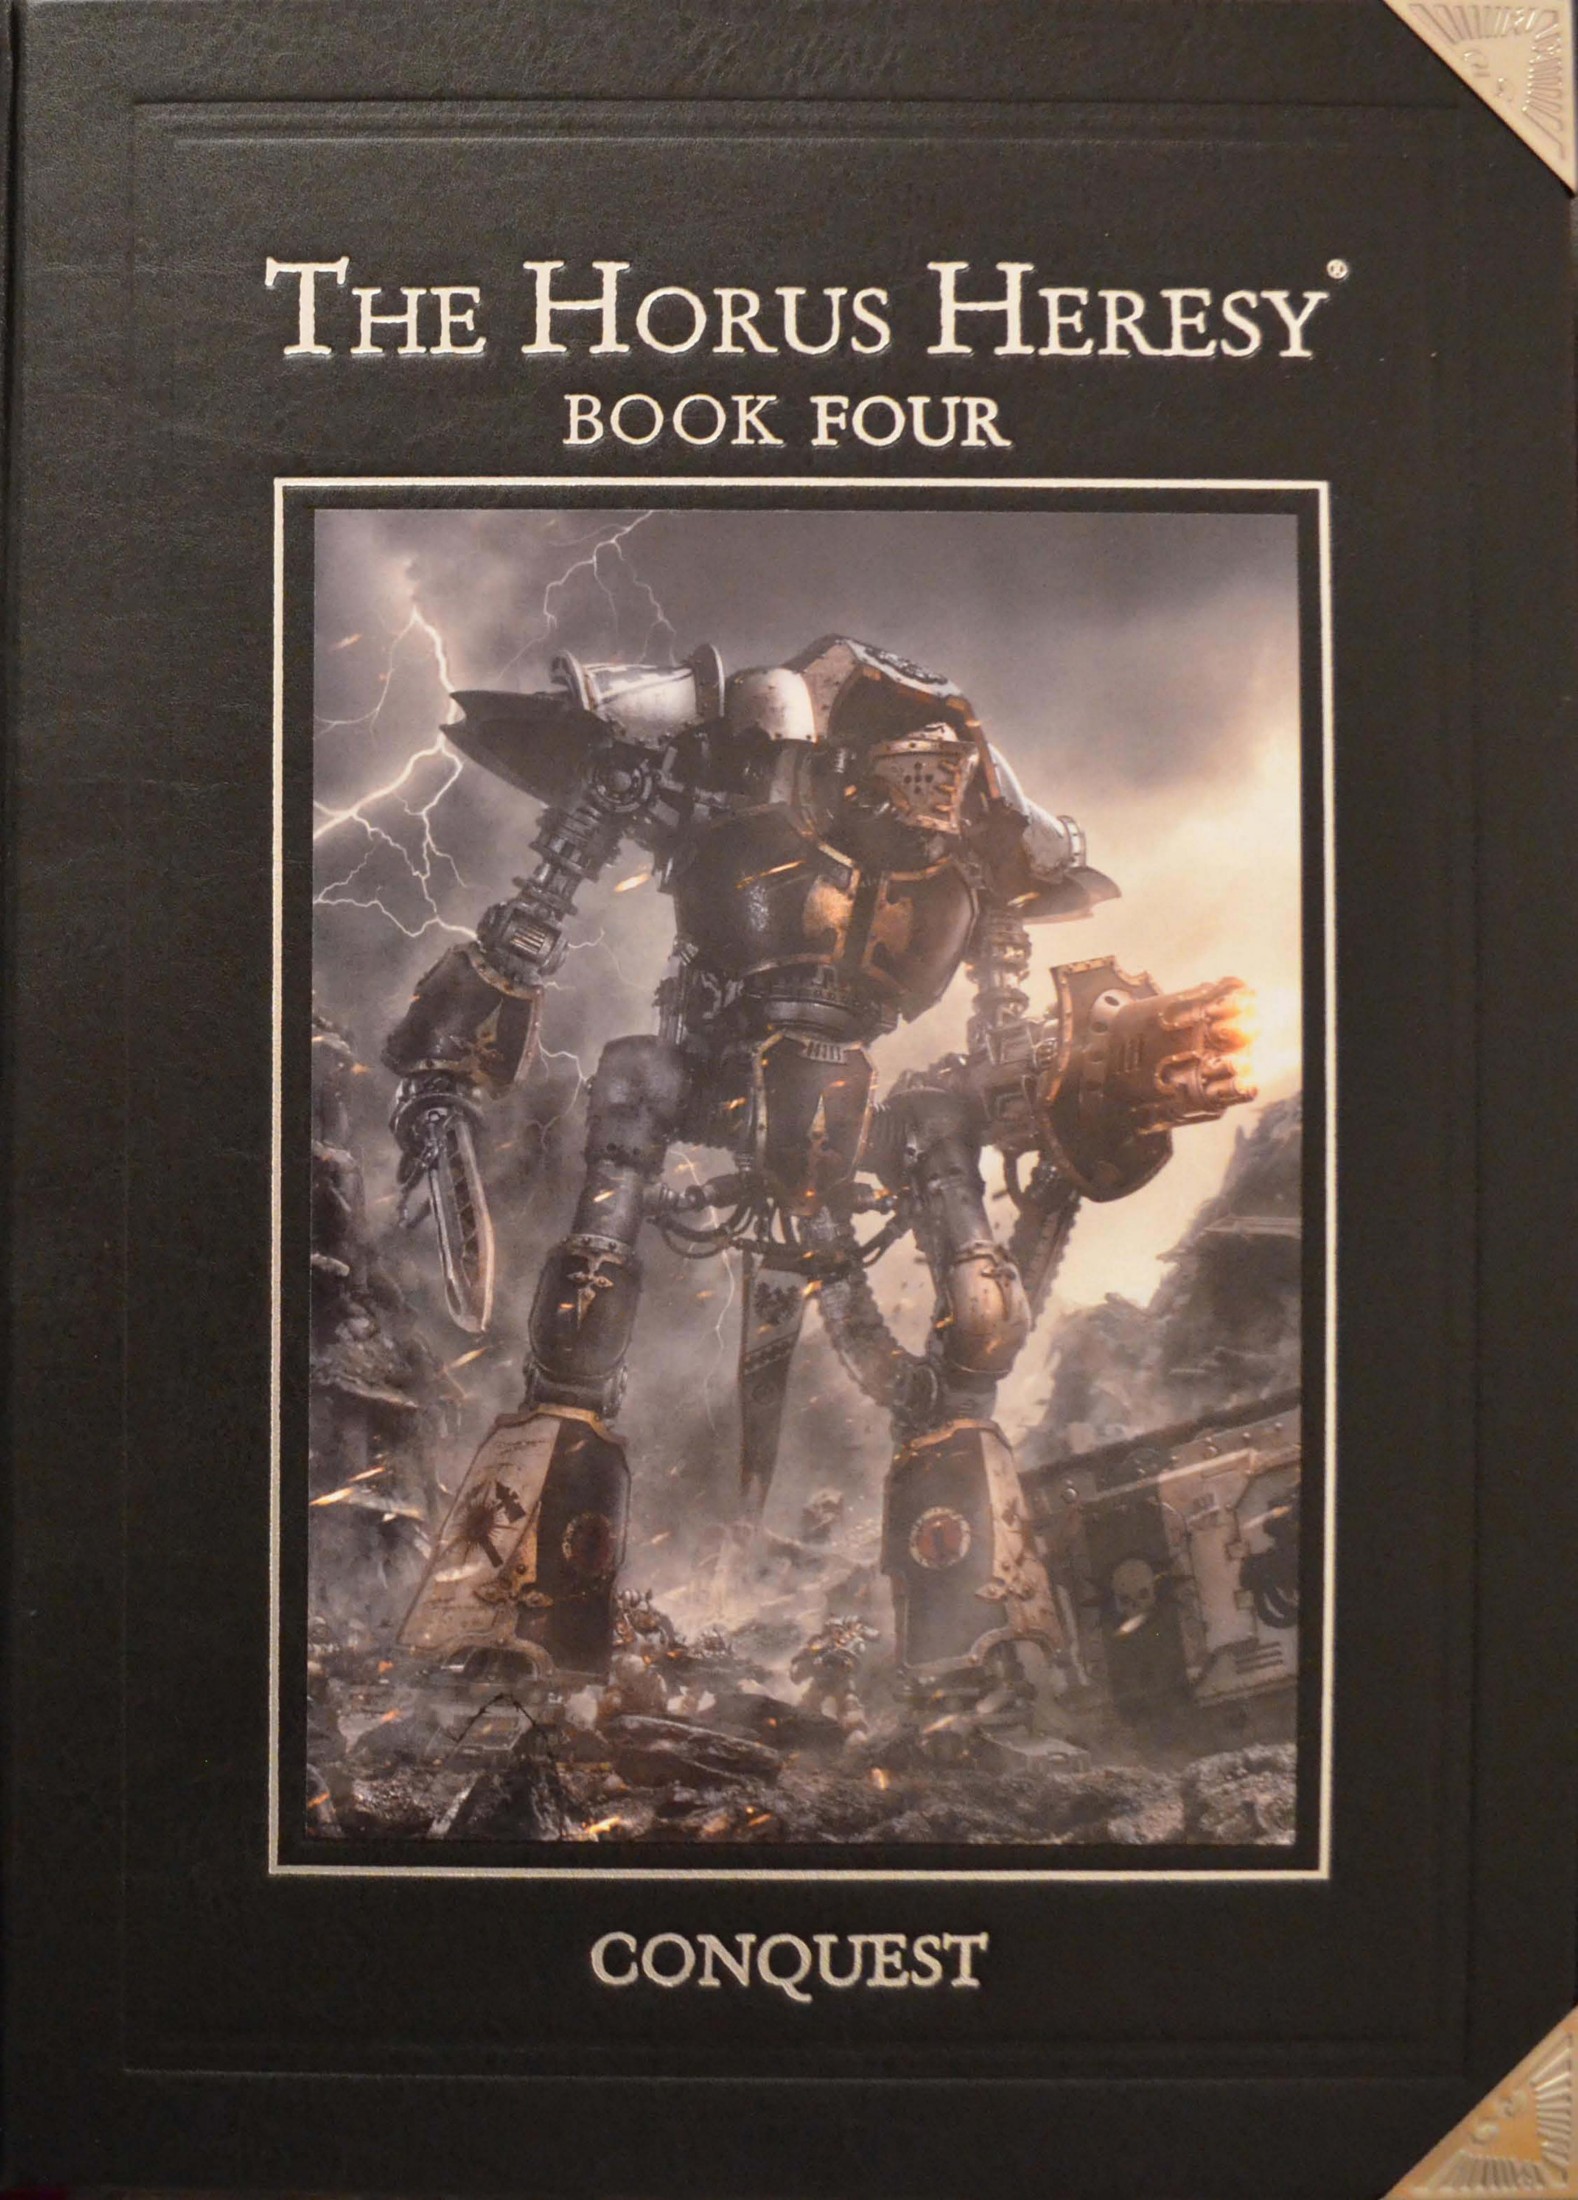 The Horus Heresy Book 4 Conquest